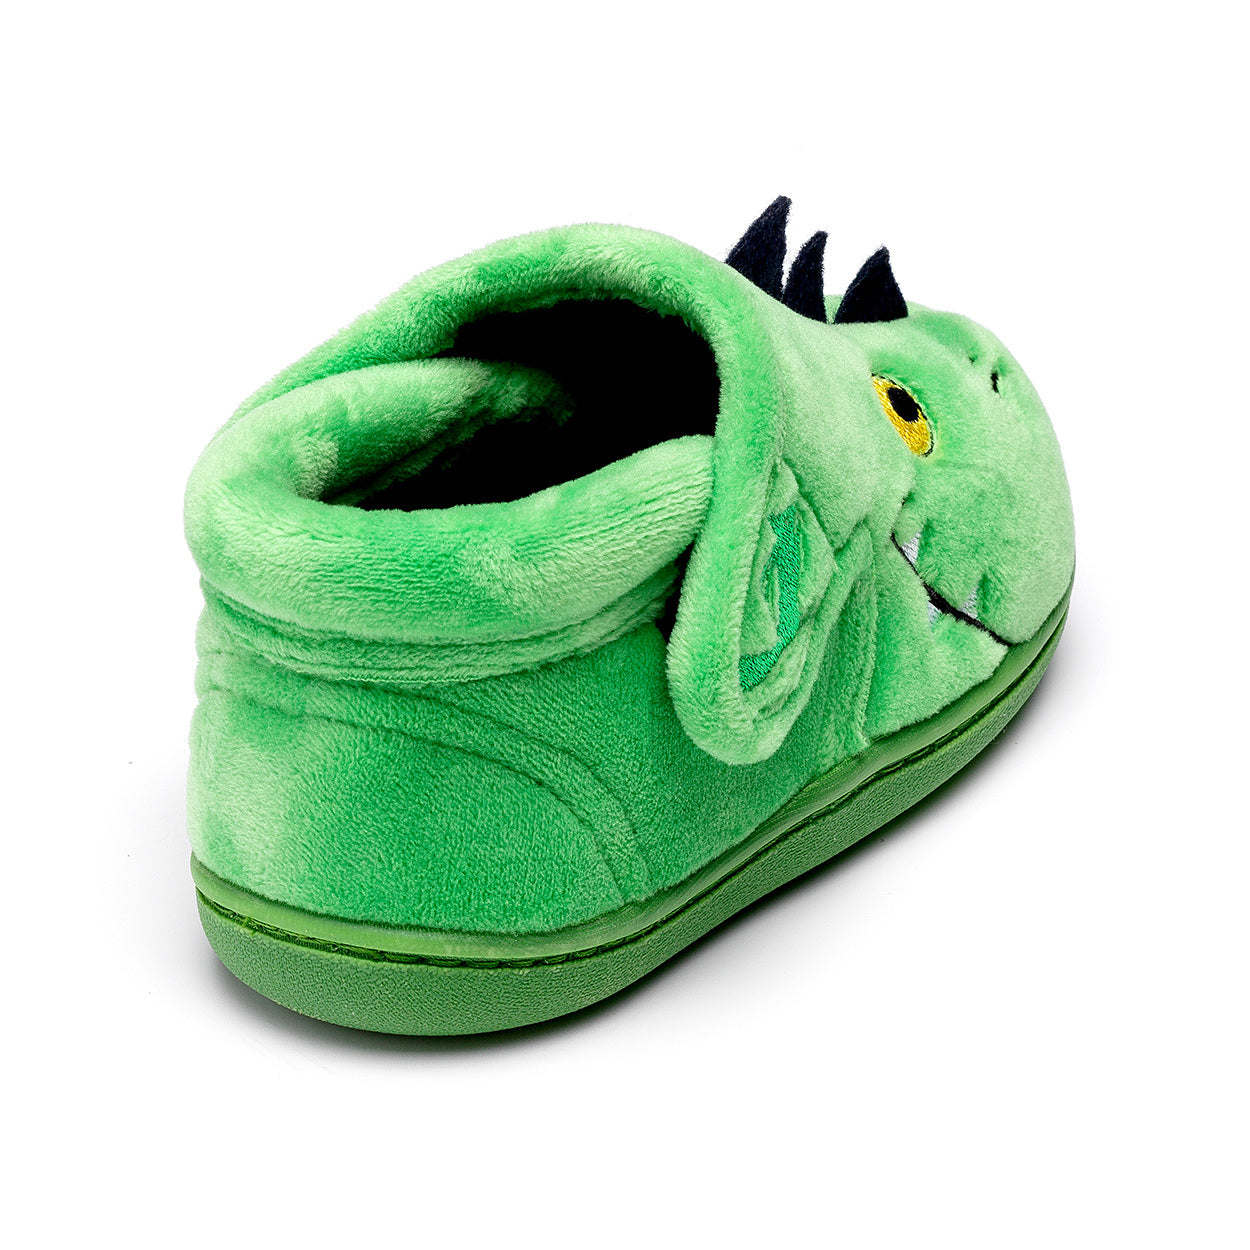 Scorch Dragon Slippers